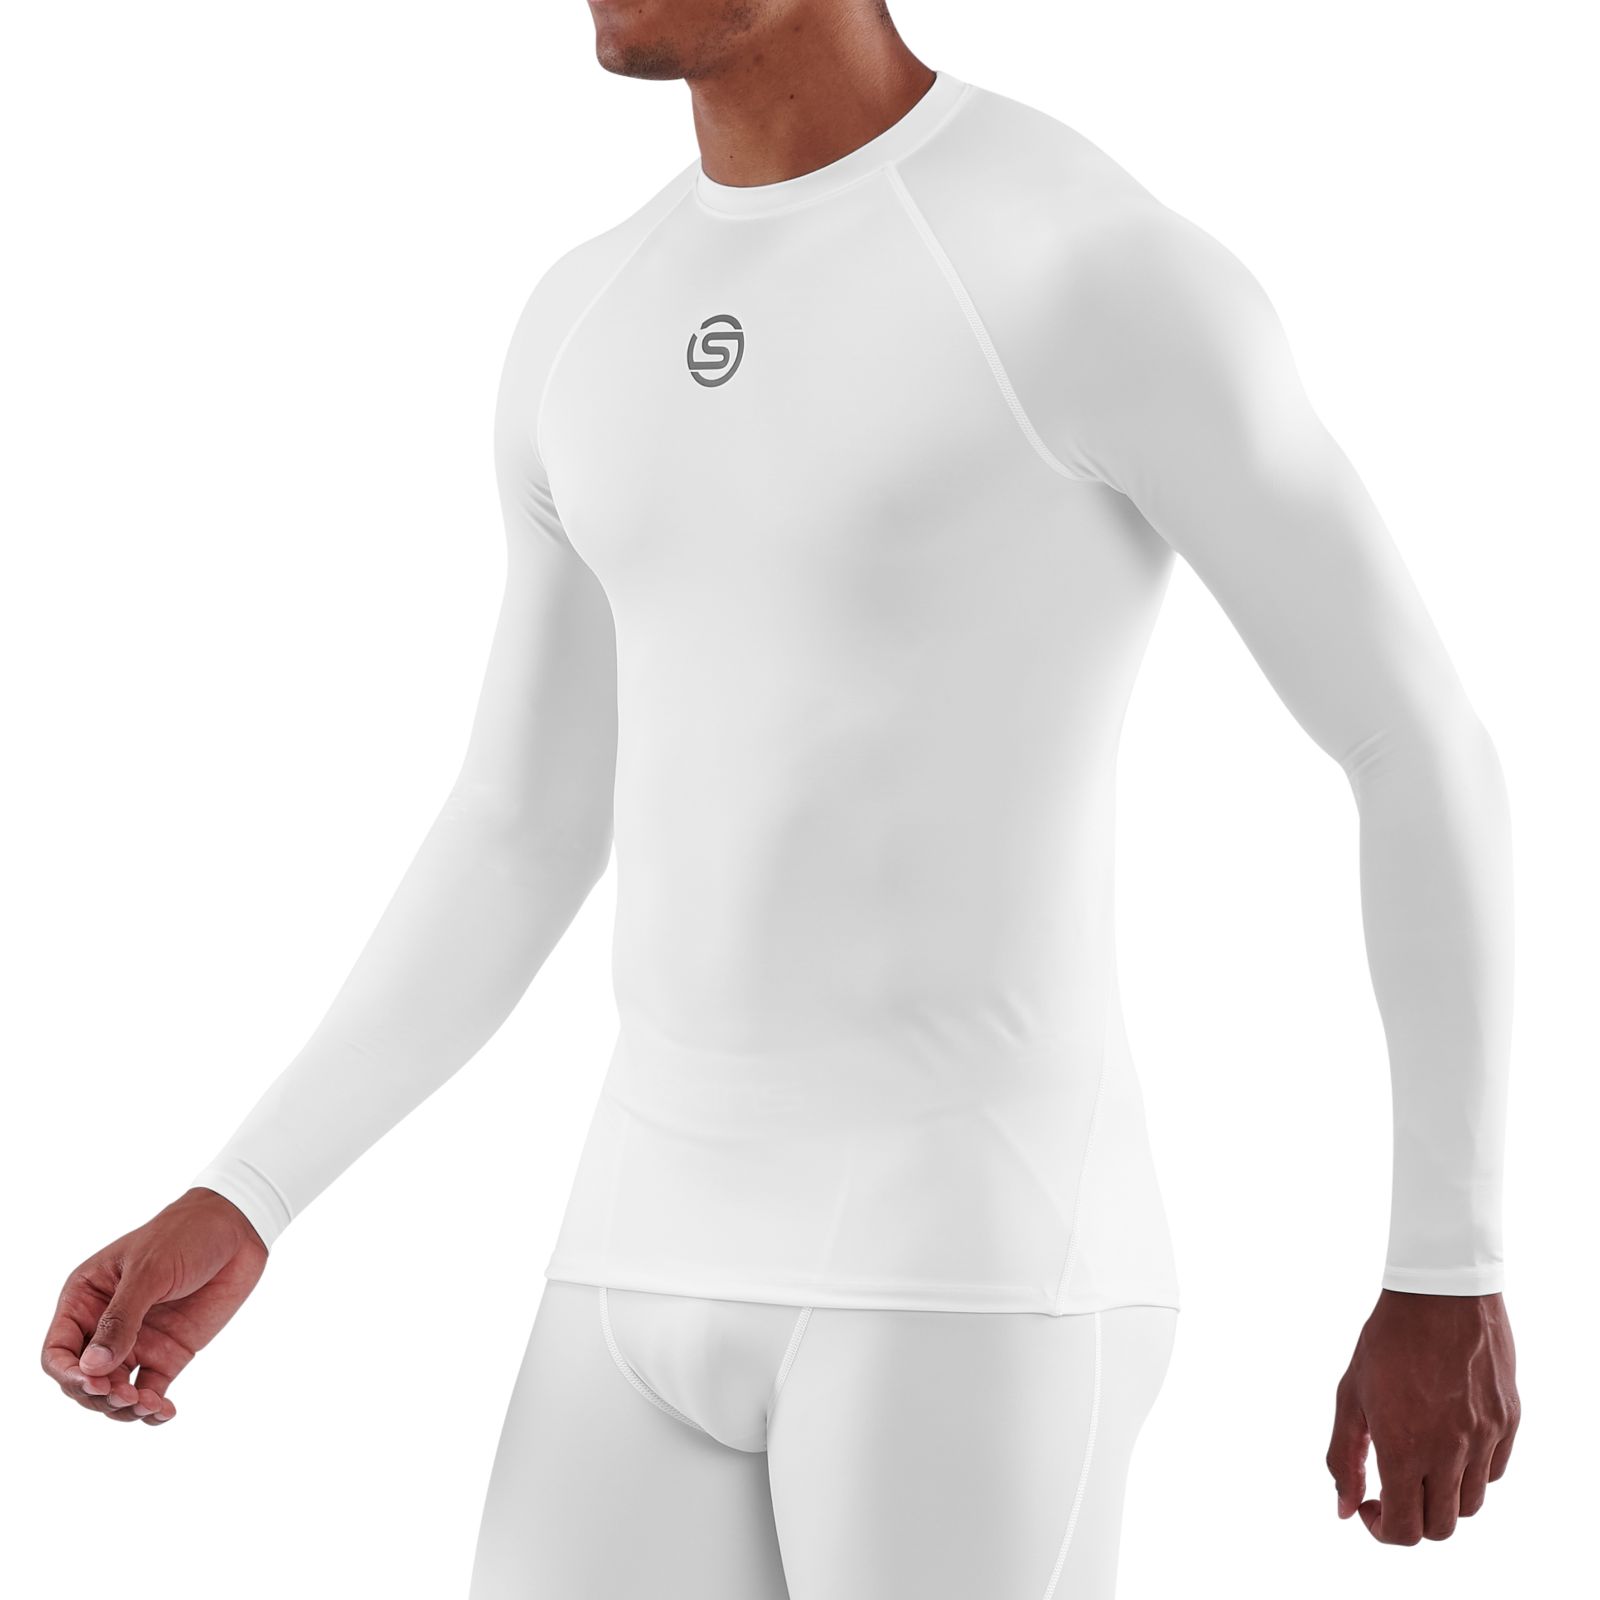 Trendy and Organic white long sleeve compression shirt for All